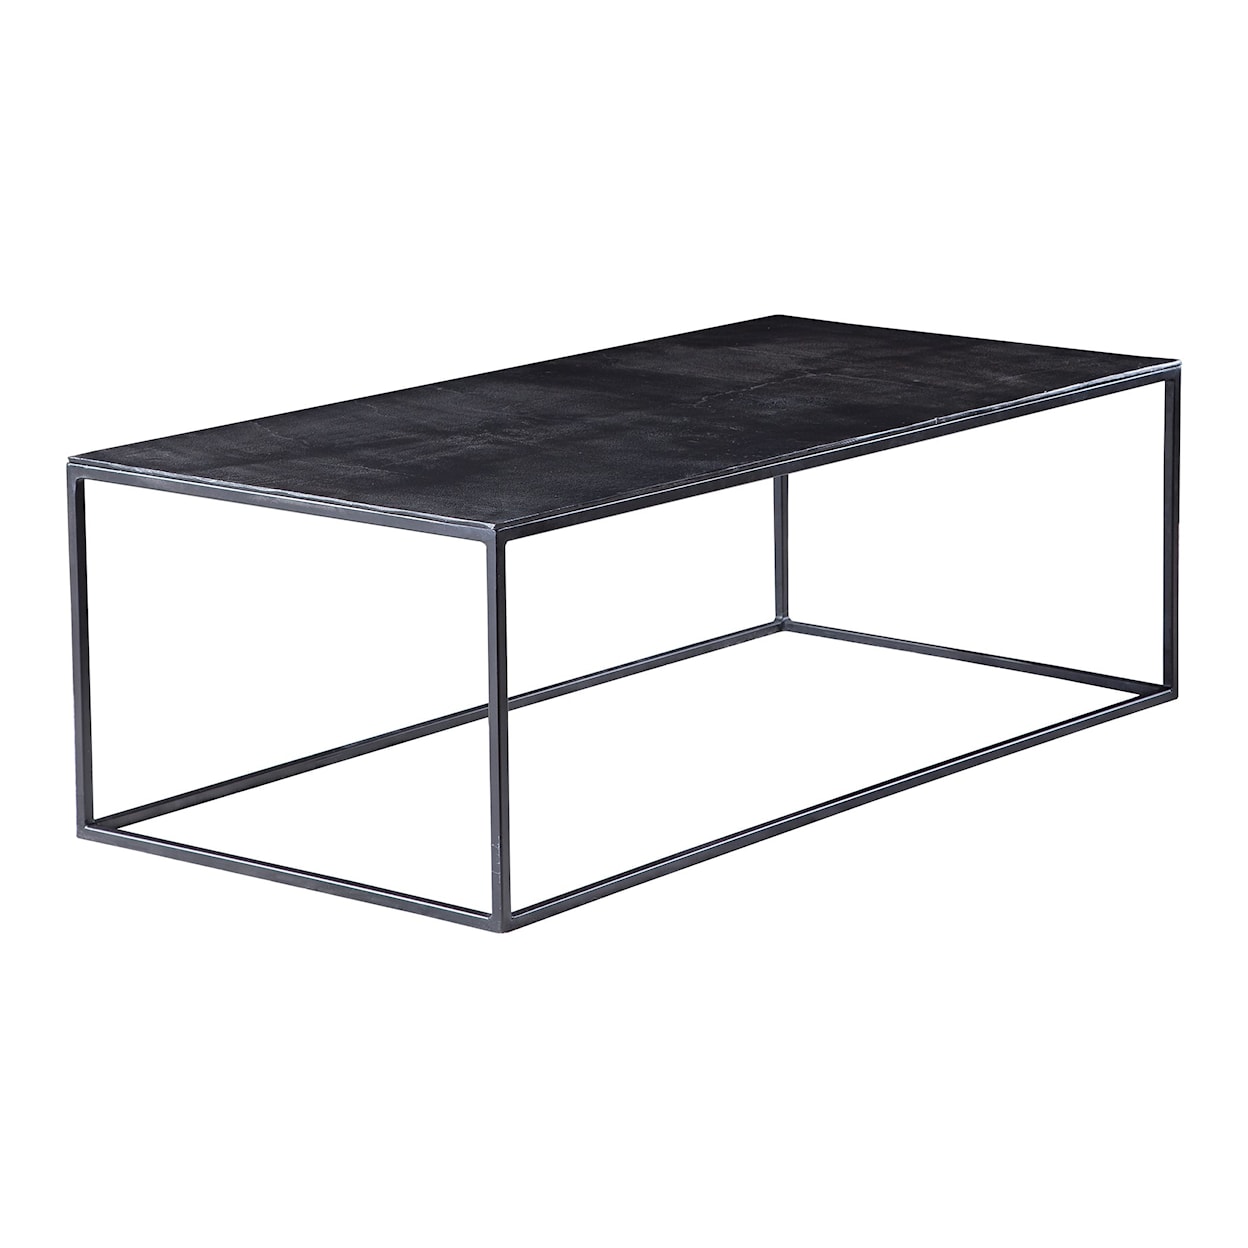 Uttermost Accent Furniture - Occasional Tables Coreene Industrial Coffee Table